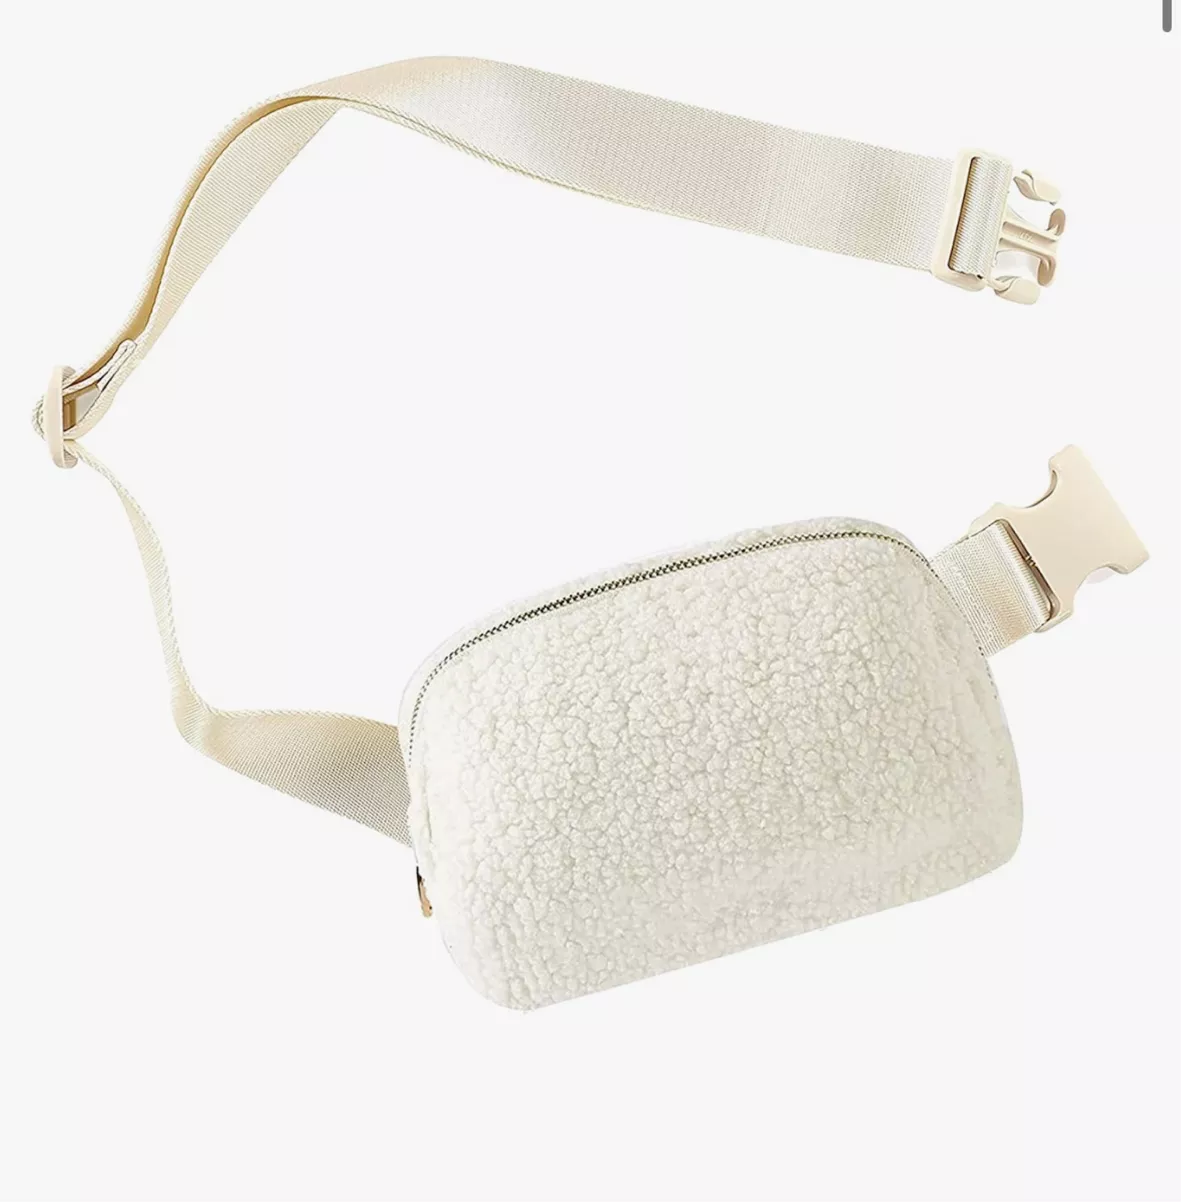 How cute! Thr bumbag is my favorite! Which one of these shearling